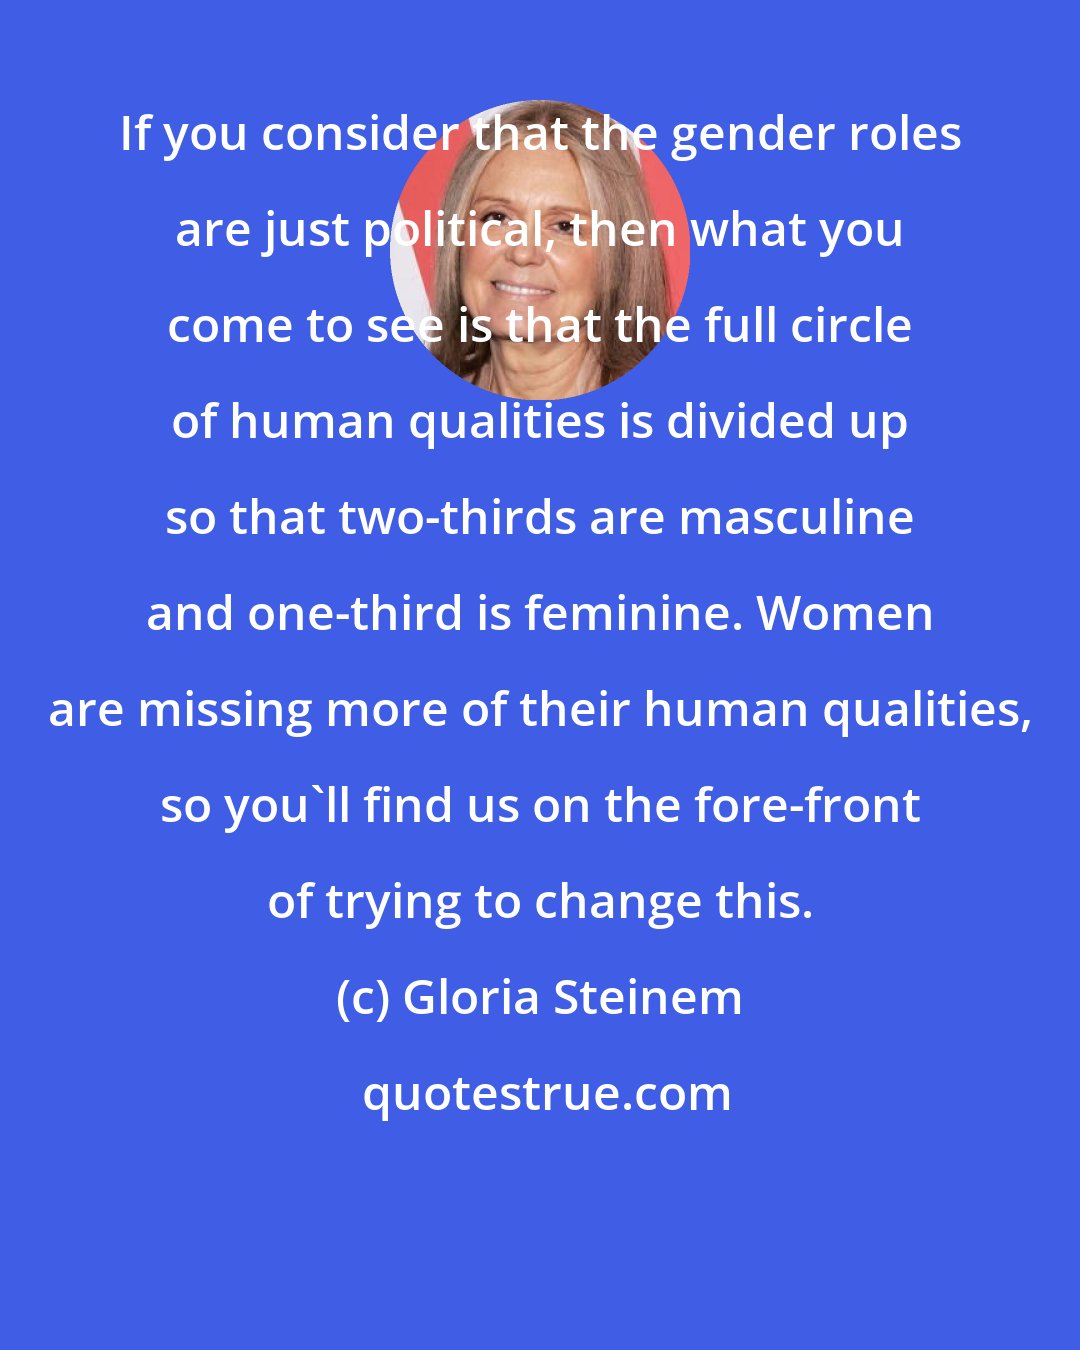 Gloria Steinem: If you consider that the gender roles are just political, then what you come to see is that the full circle of human qualities is divided up so that two-thirds are masculine and one-third is feminine. Women are missing more of their human qualities, so you'll find us on the fore-front of trying to change this.